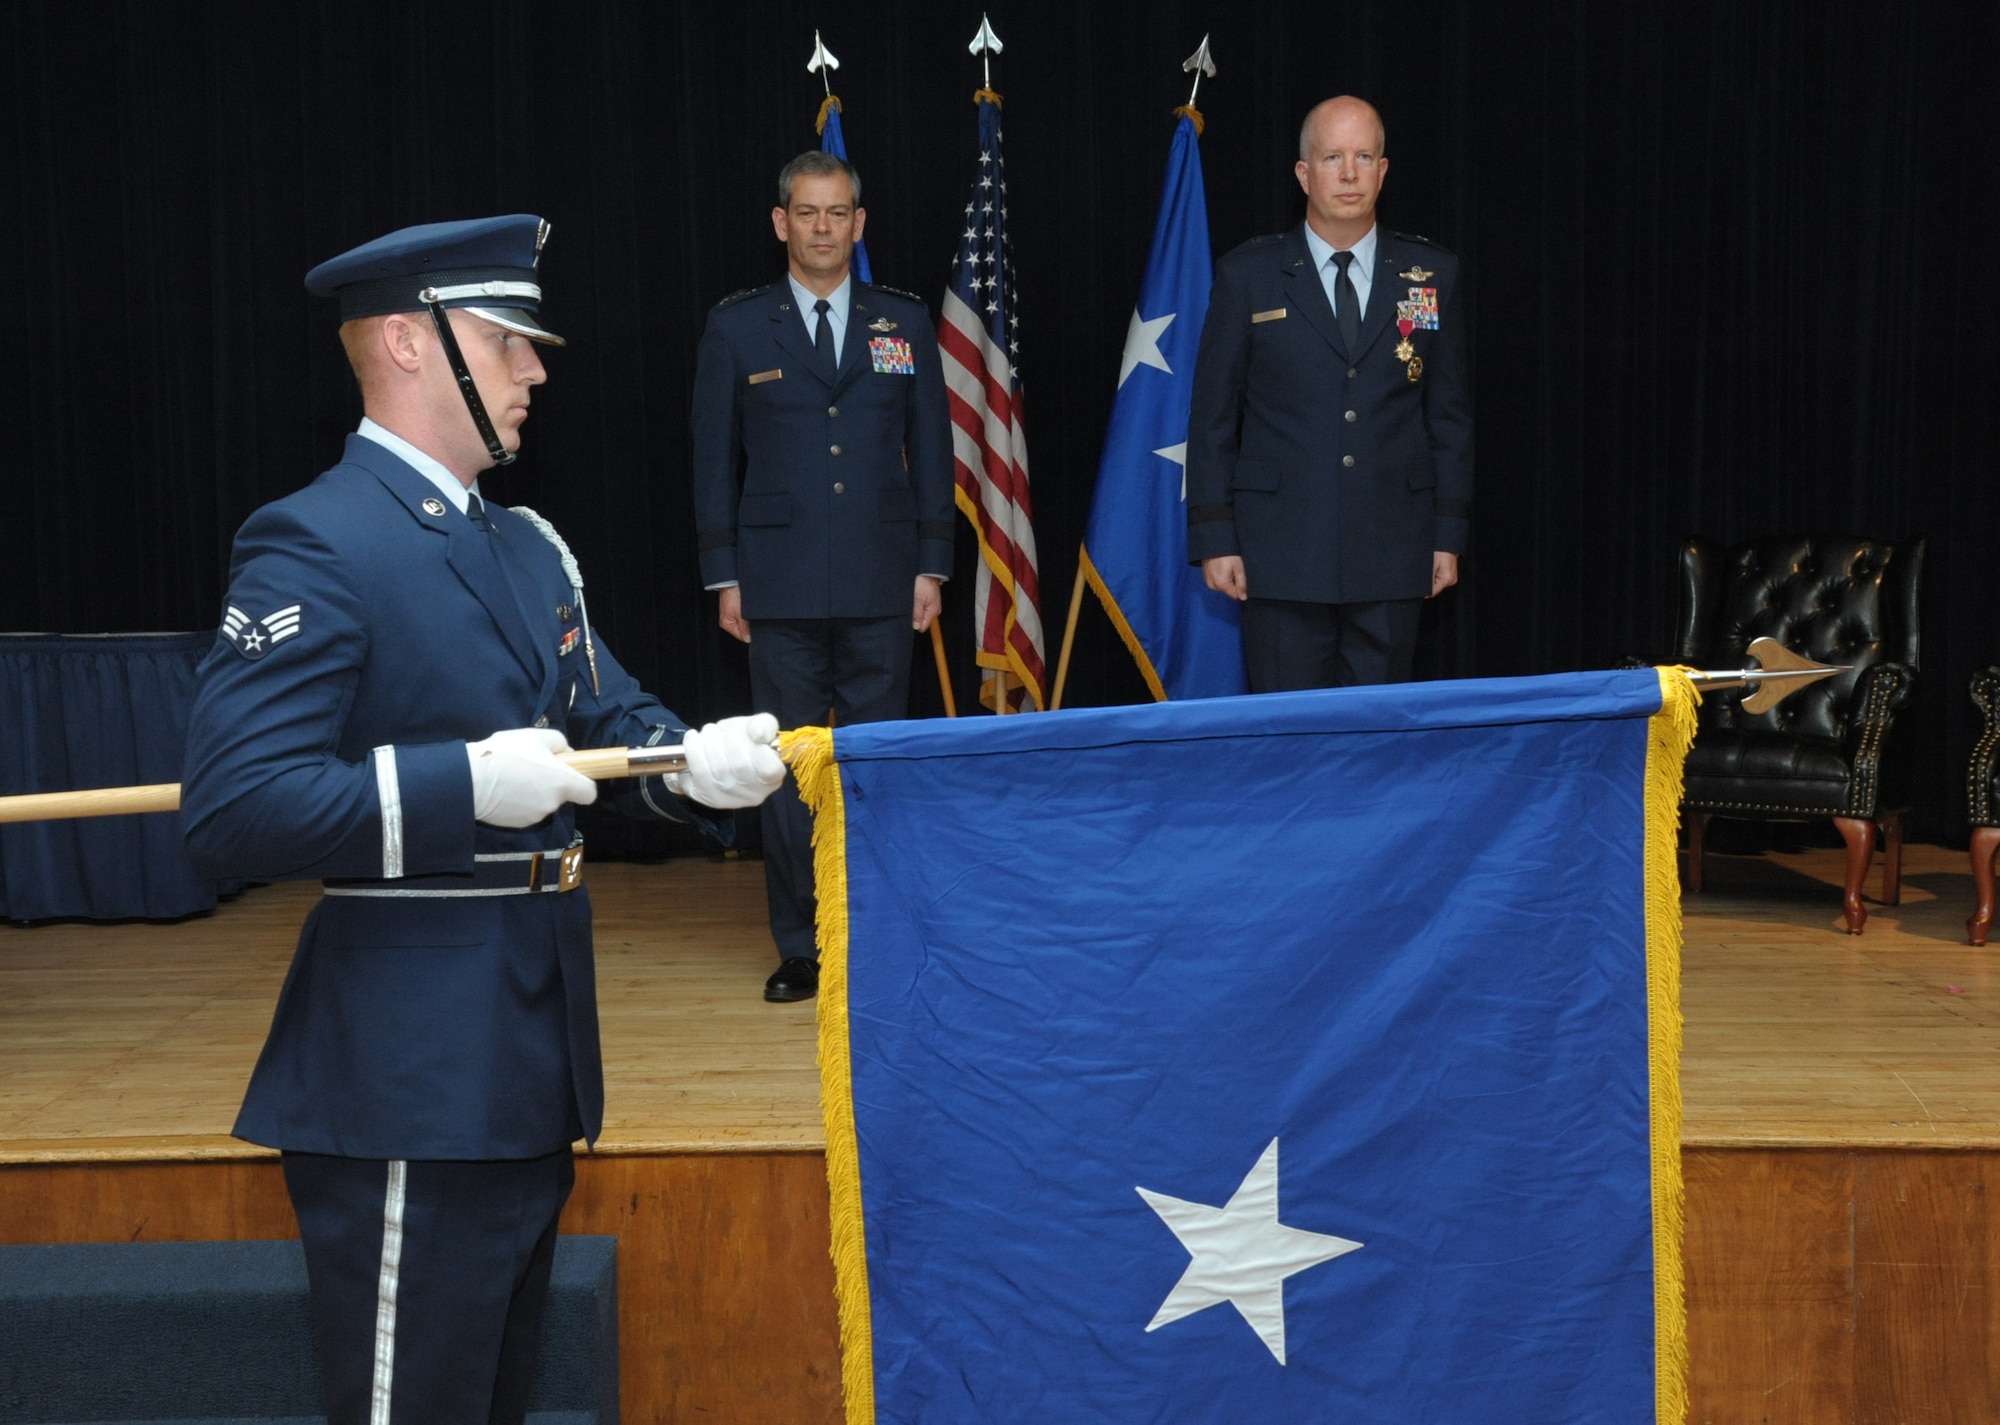 Lt. Gen. Kenneth Wilsbach, commander of Alaskan North American Aerospace Defense Command Region, Alaskan Command, U.S. Northern Command, and Eleventh Air Force, and Col. Joel Carey stand at attention during the personal colors unfurling during Carey’s promotion to brigadier general, May 18, 2018, Joint Base San Antonio-Randolph, Texas. The 12FTW is responsible for four single-source aviation pipelines – Pilot Instructor Training, Combat Systems Officer Training, Remotely Piloted Aircraft Pilot Indoctrination, and Basic Sensor Operator Qualification. (U.S. Air Force by Joel Martinez)